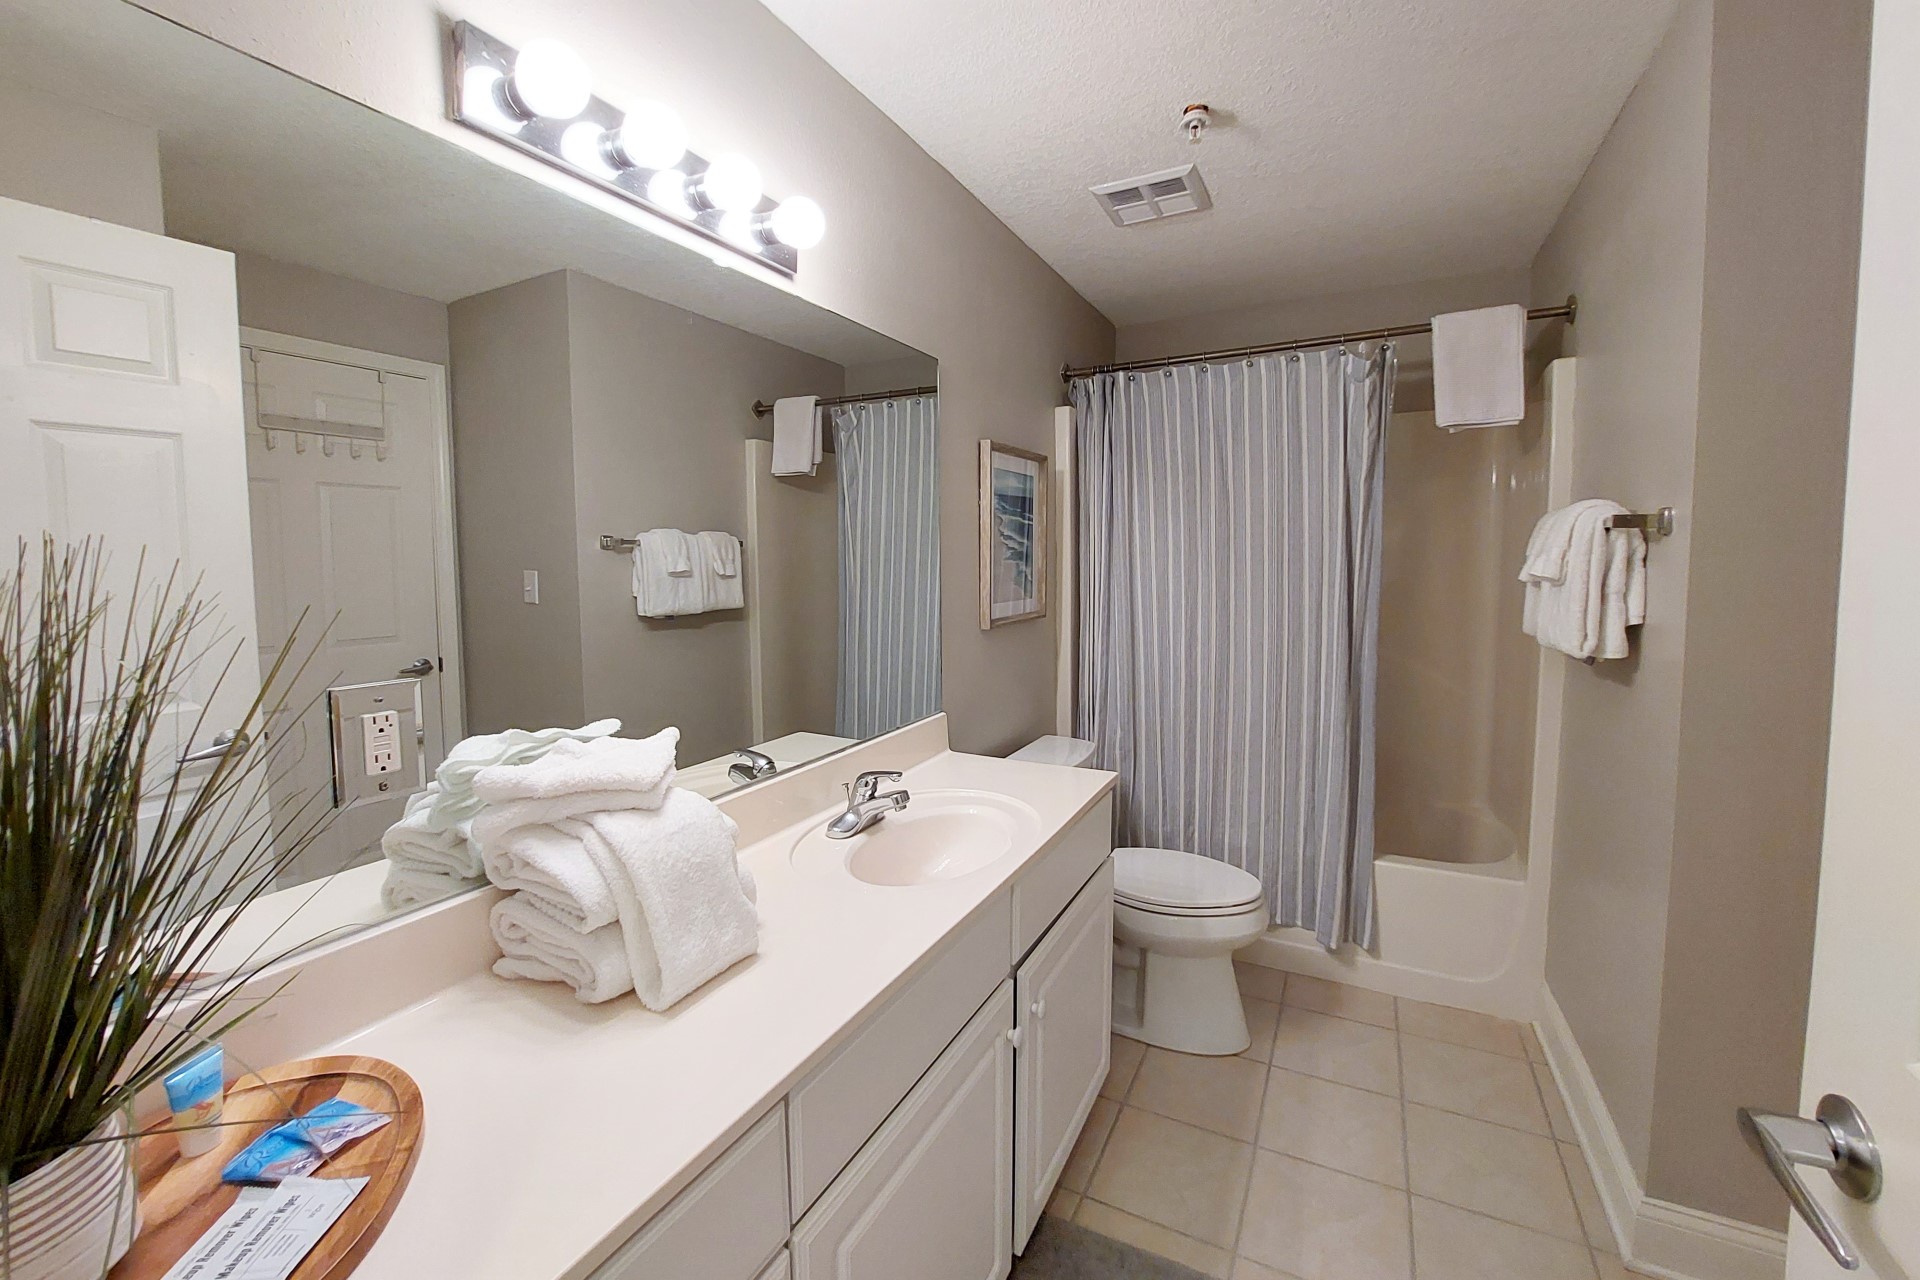 The second bathroom includes a shower/tub combo and can be a